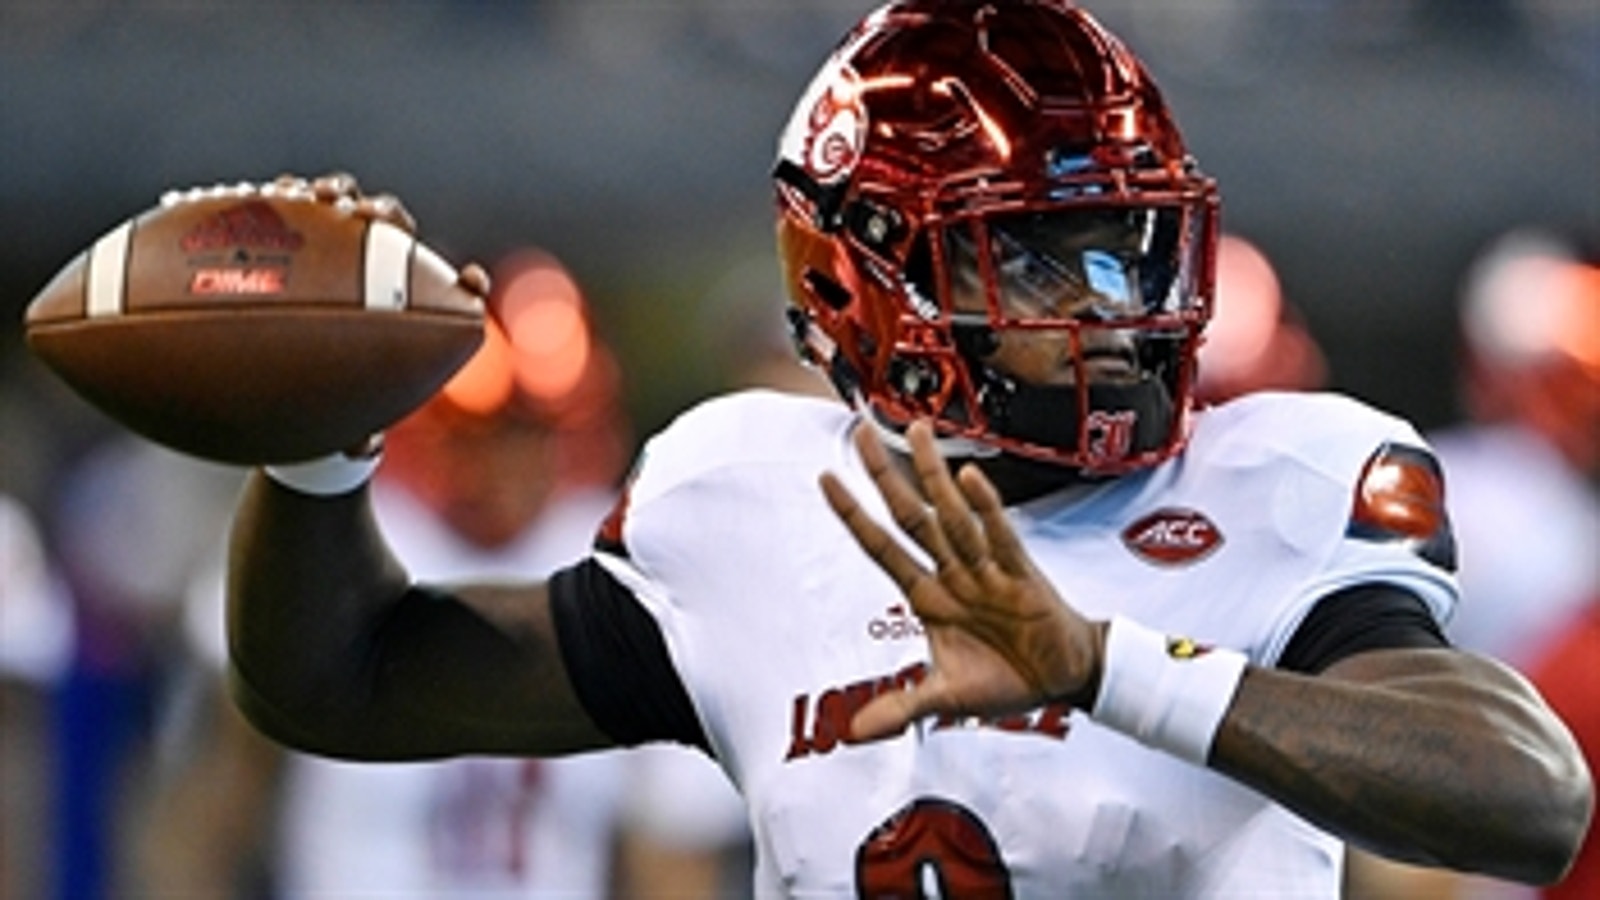 Lamar Jackson and the Louisville Cardinals soar over the Purdue Boilermakers 35-28